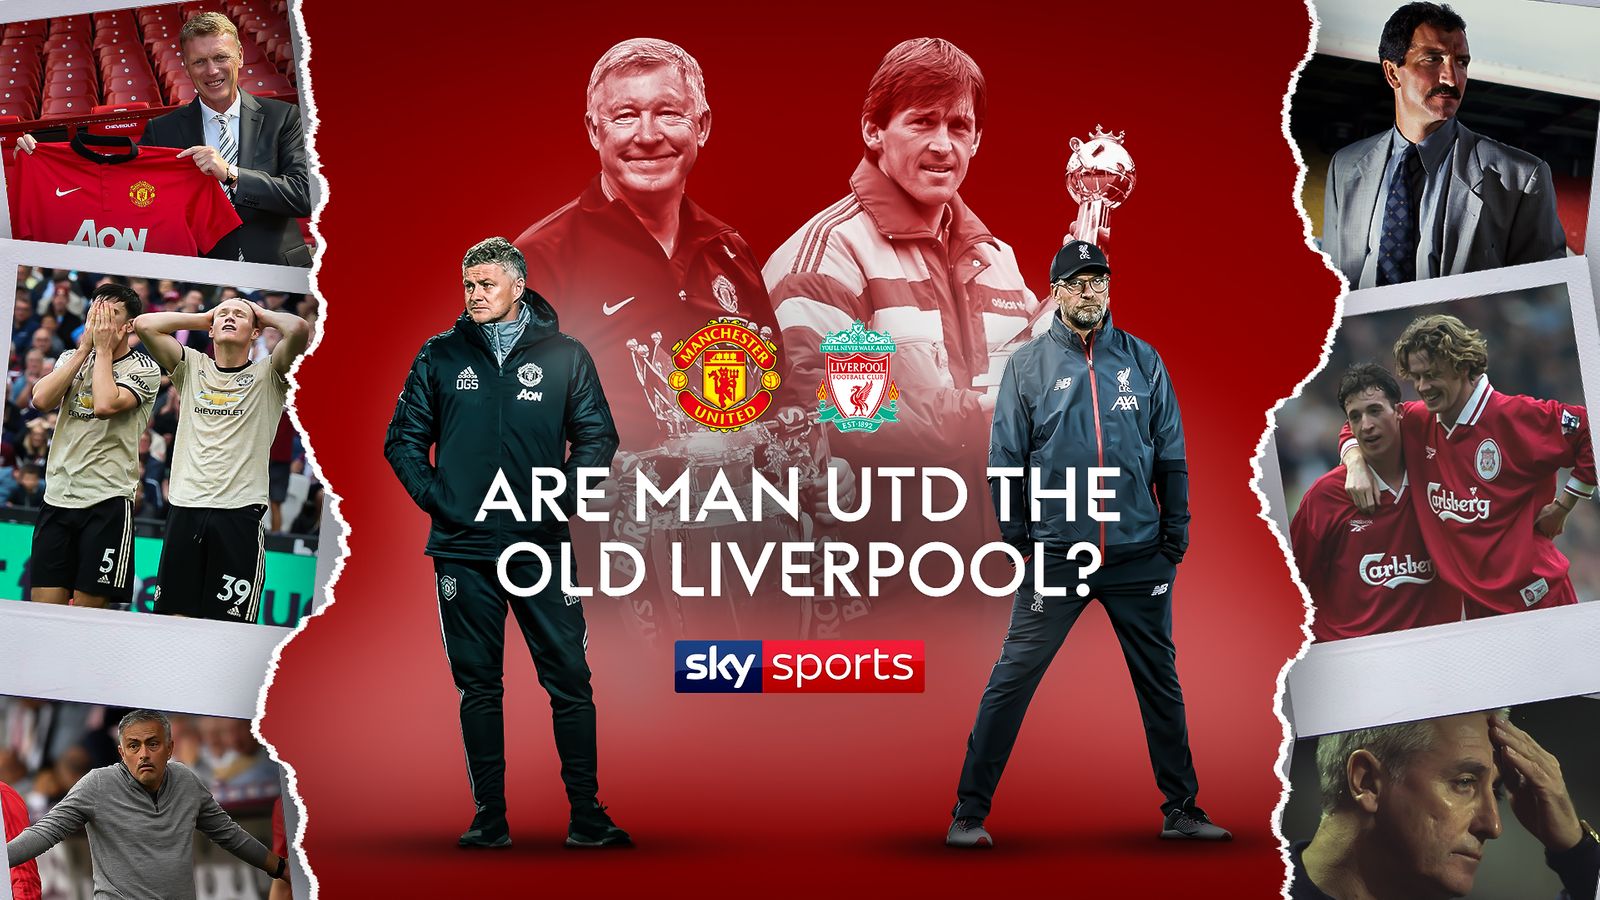 Are Manchester United the old Liverpool of the 1990s?